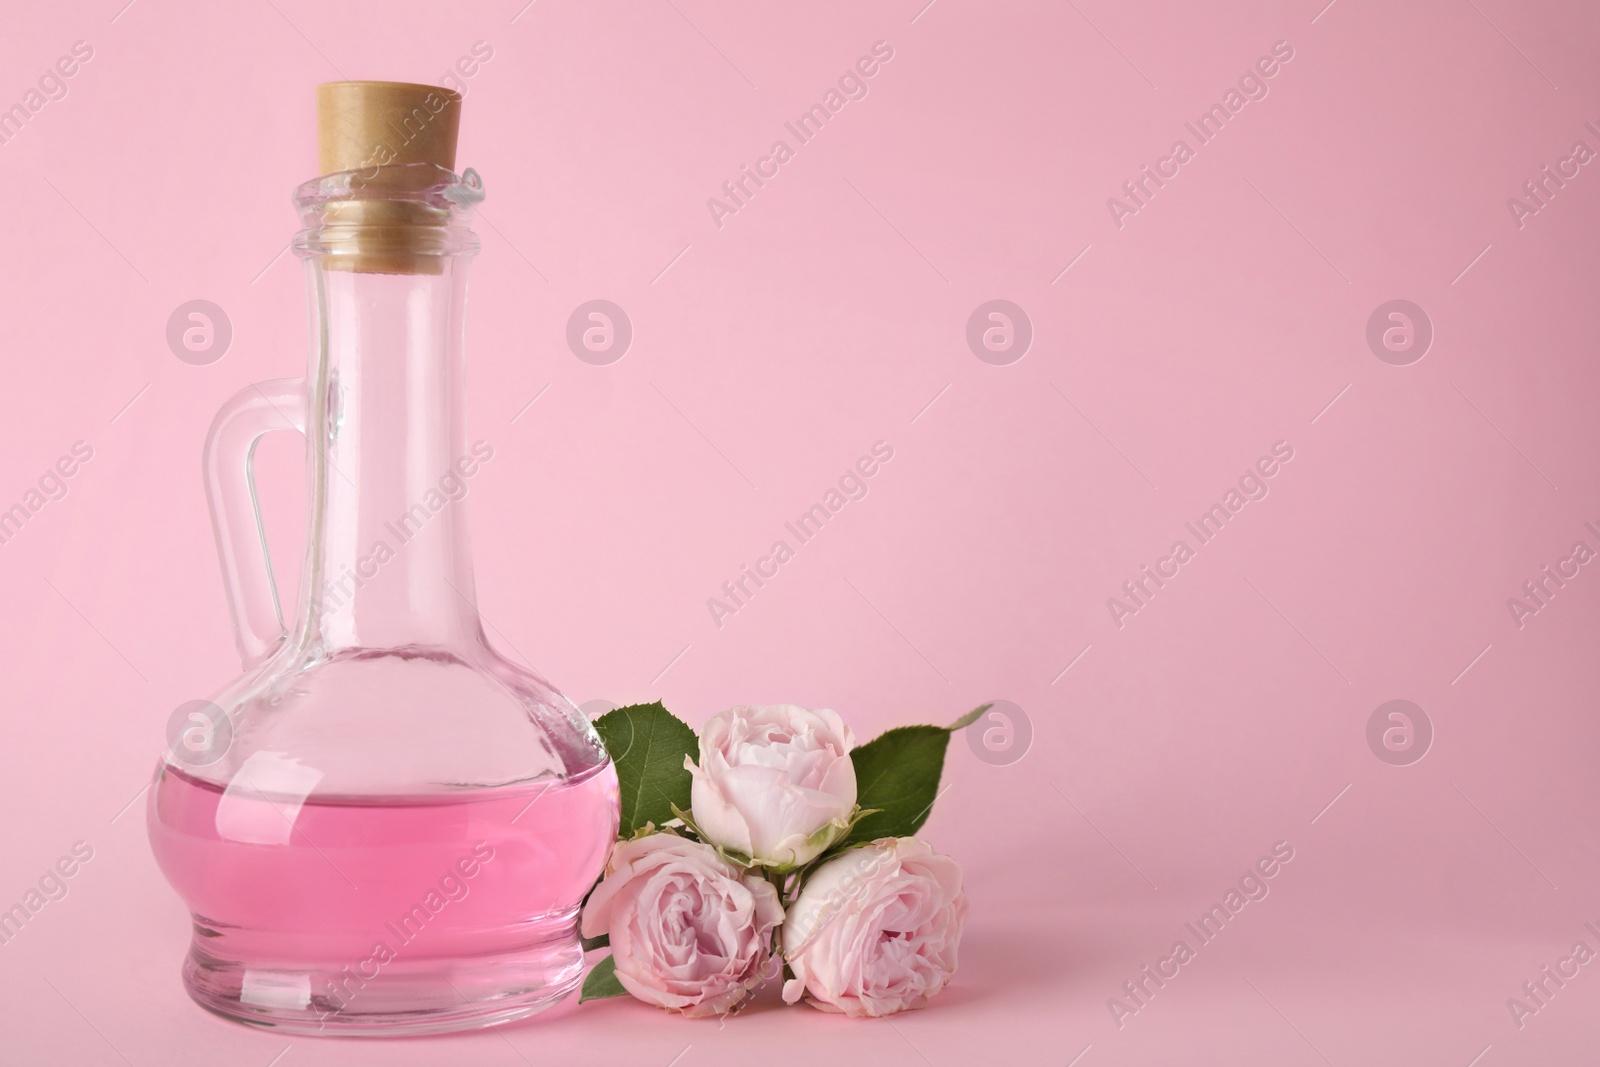 Photo of Bottle of essential oil and roses on pink background. Space for text